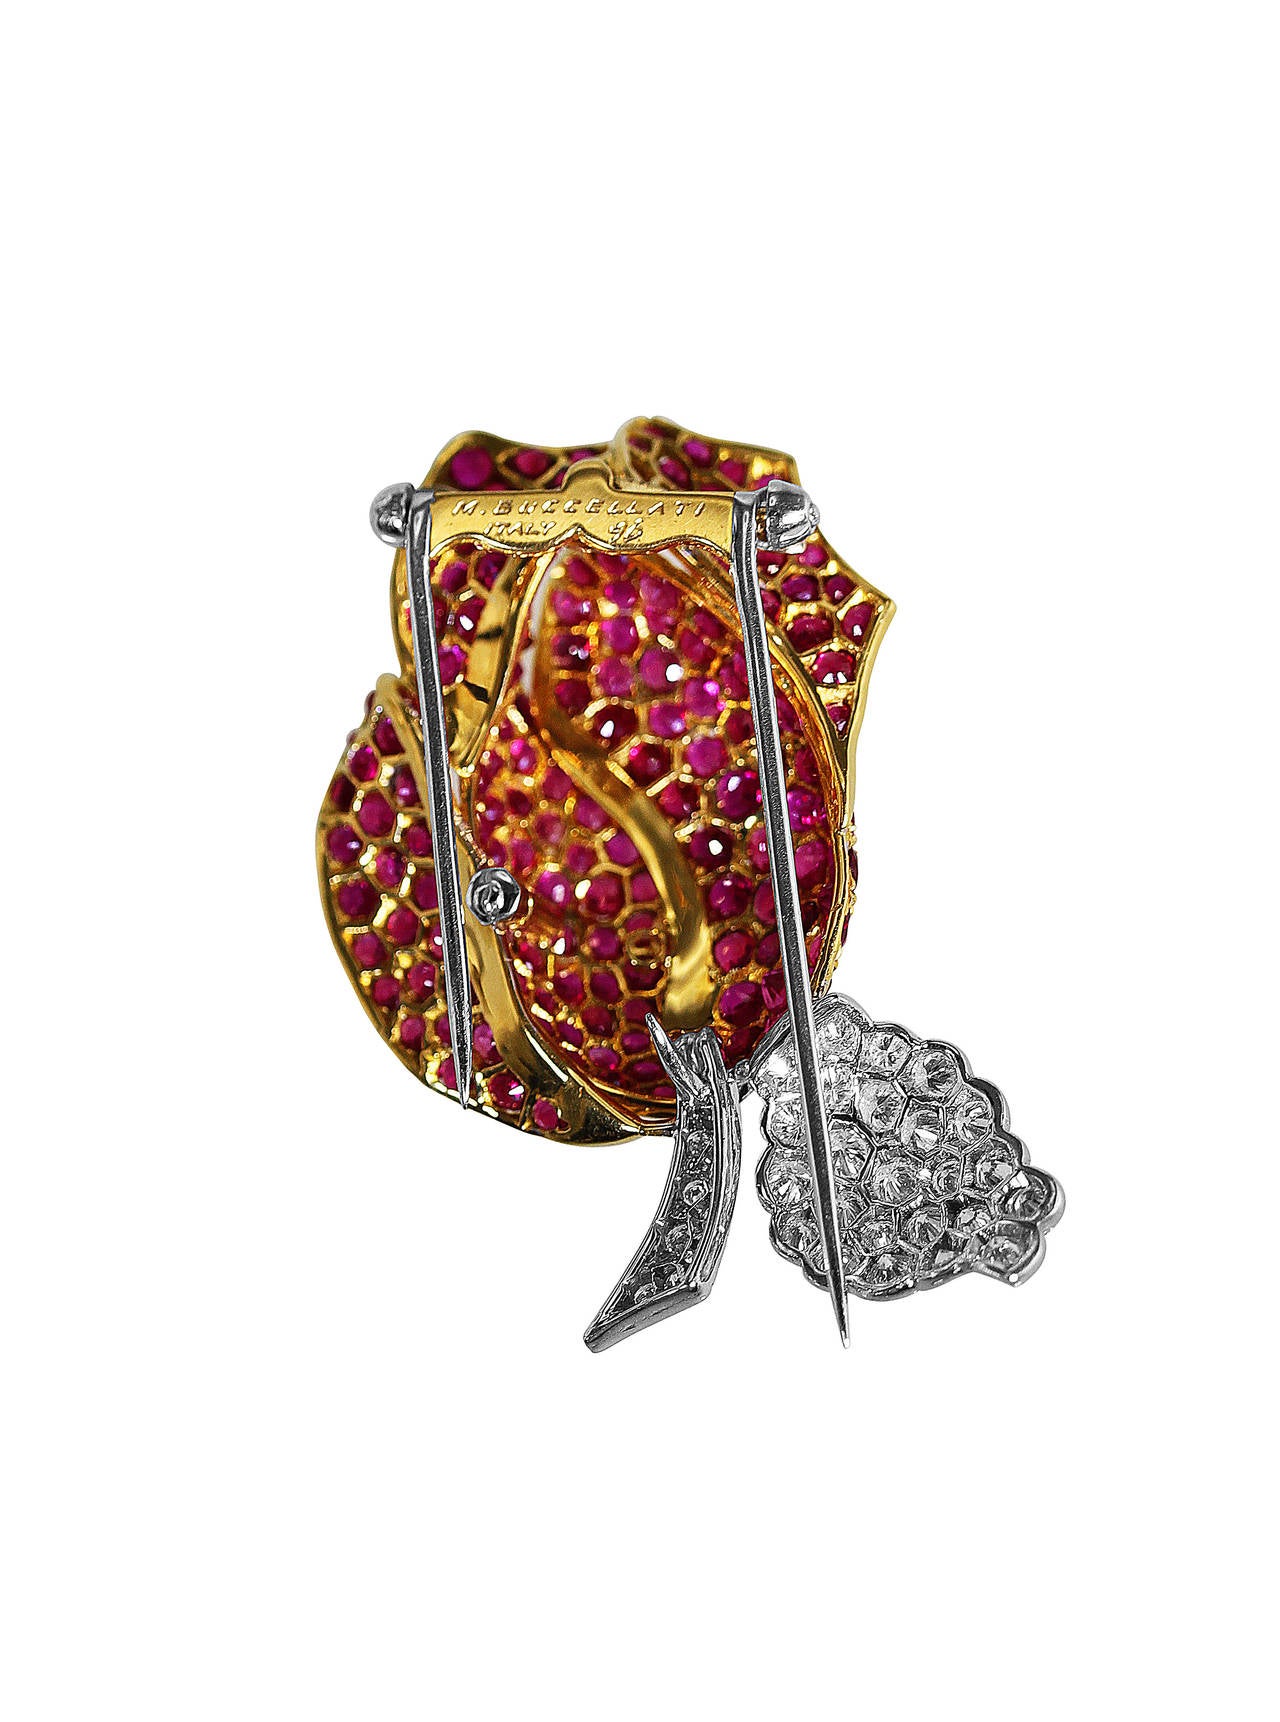 An 18 karat white and yellow gold, ruby and diamond rose brooch by Buccellati, Italy, the stylized rose set with 160 round rubies weighing approximately 8.00 carats, the stem and leaf set with 35 round diamonds weighing approximately 1.25 carats,